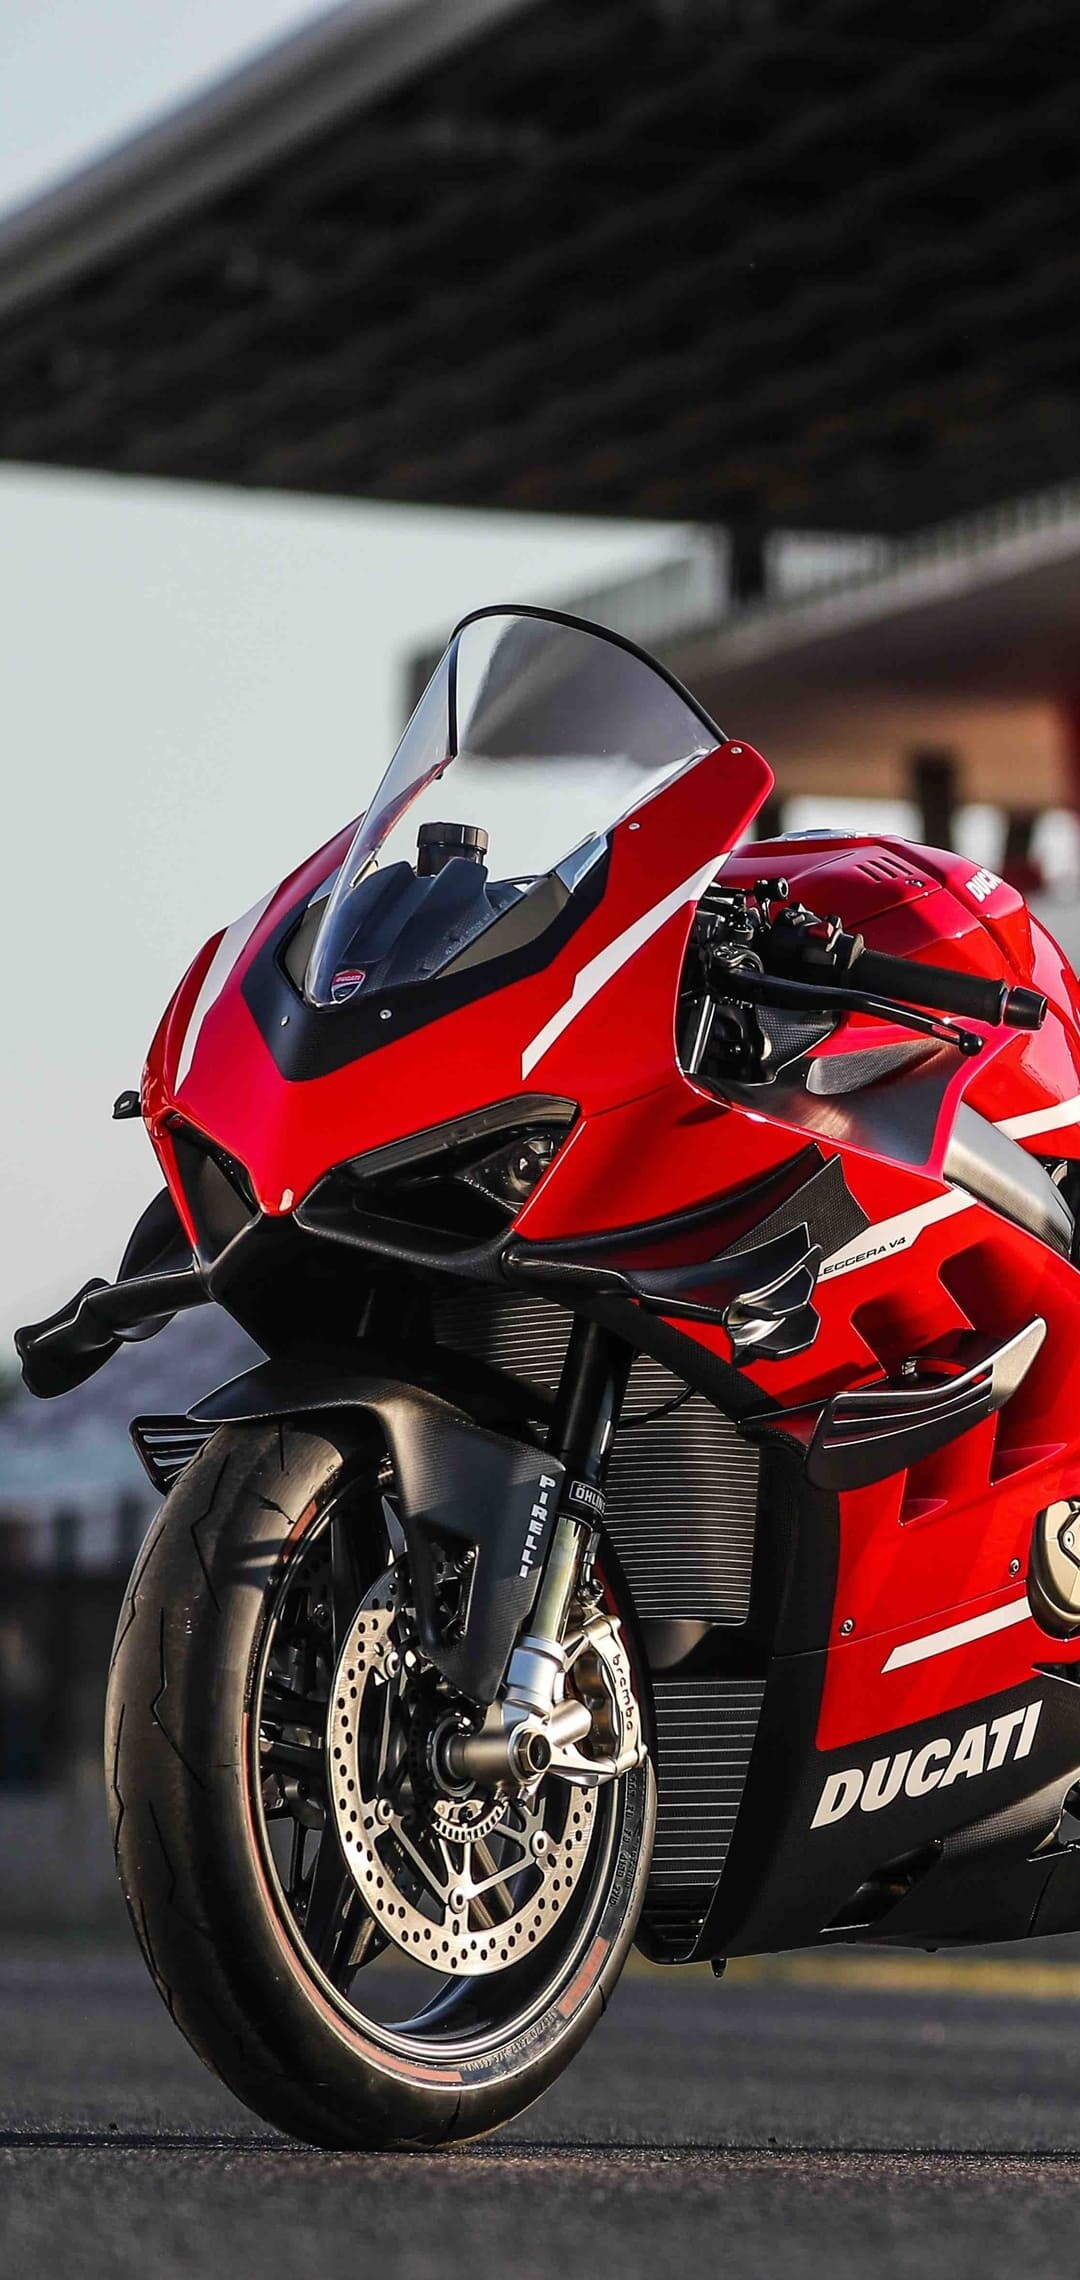 Bike: Ducati 1199 Panigale, Introduced at the 2011 Milan Motorcycle Show. 1080x2280 HD Background.